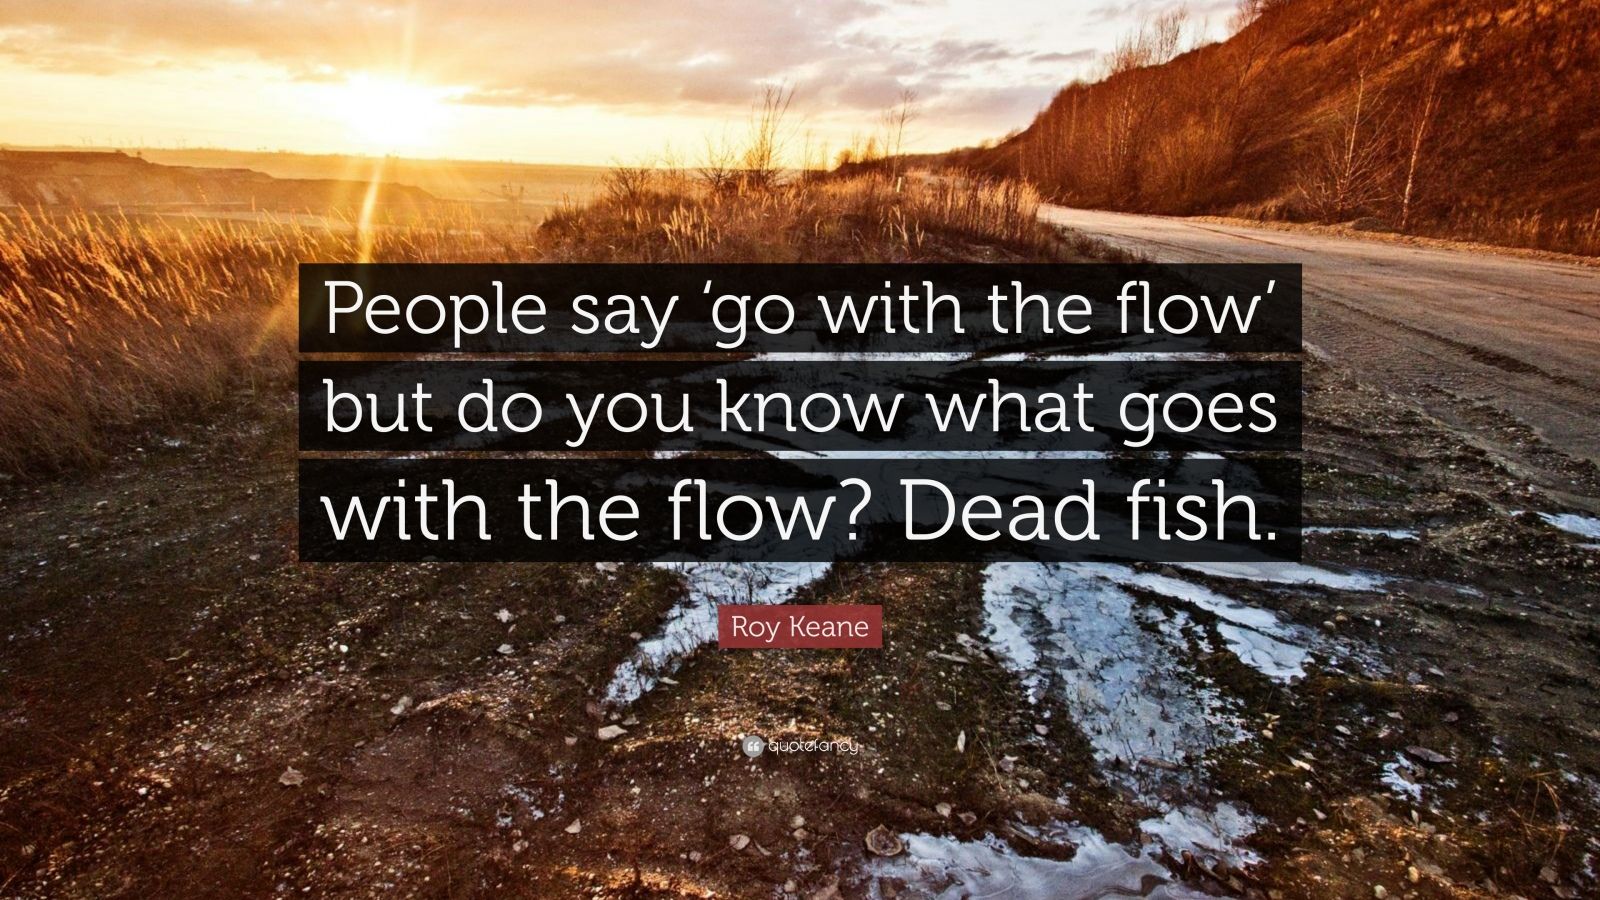 Go with the Flow by Lily Williams